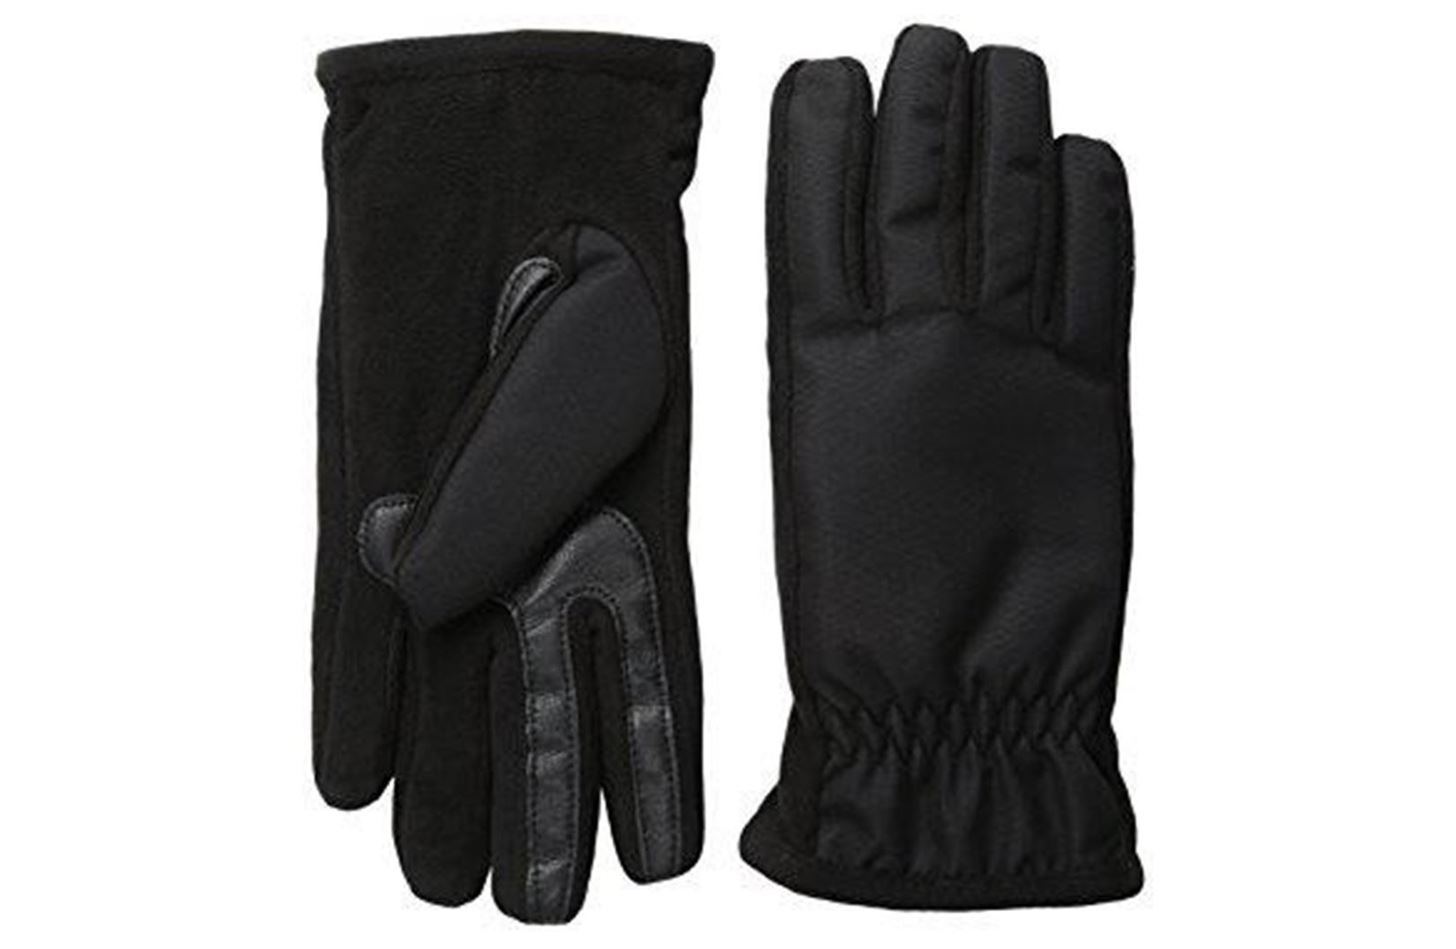 Roundup: The 5 Best Capacitive Gloves for Using Your Smartphone in the Cold